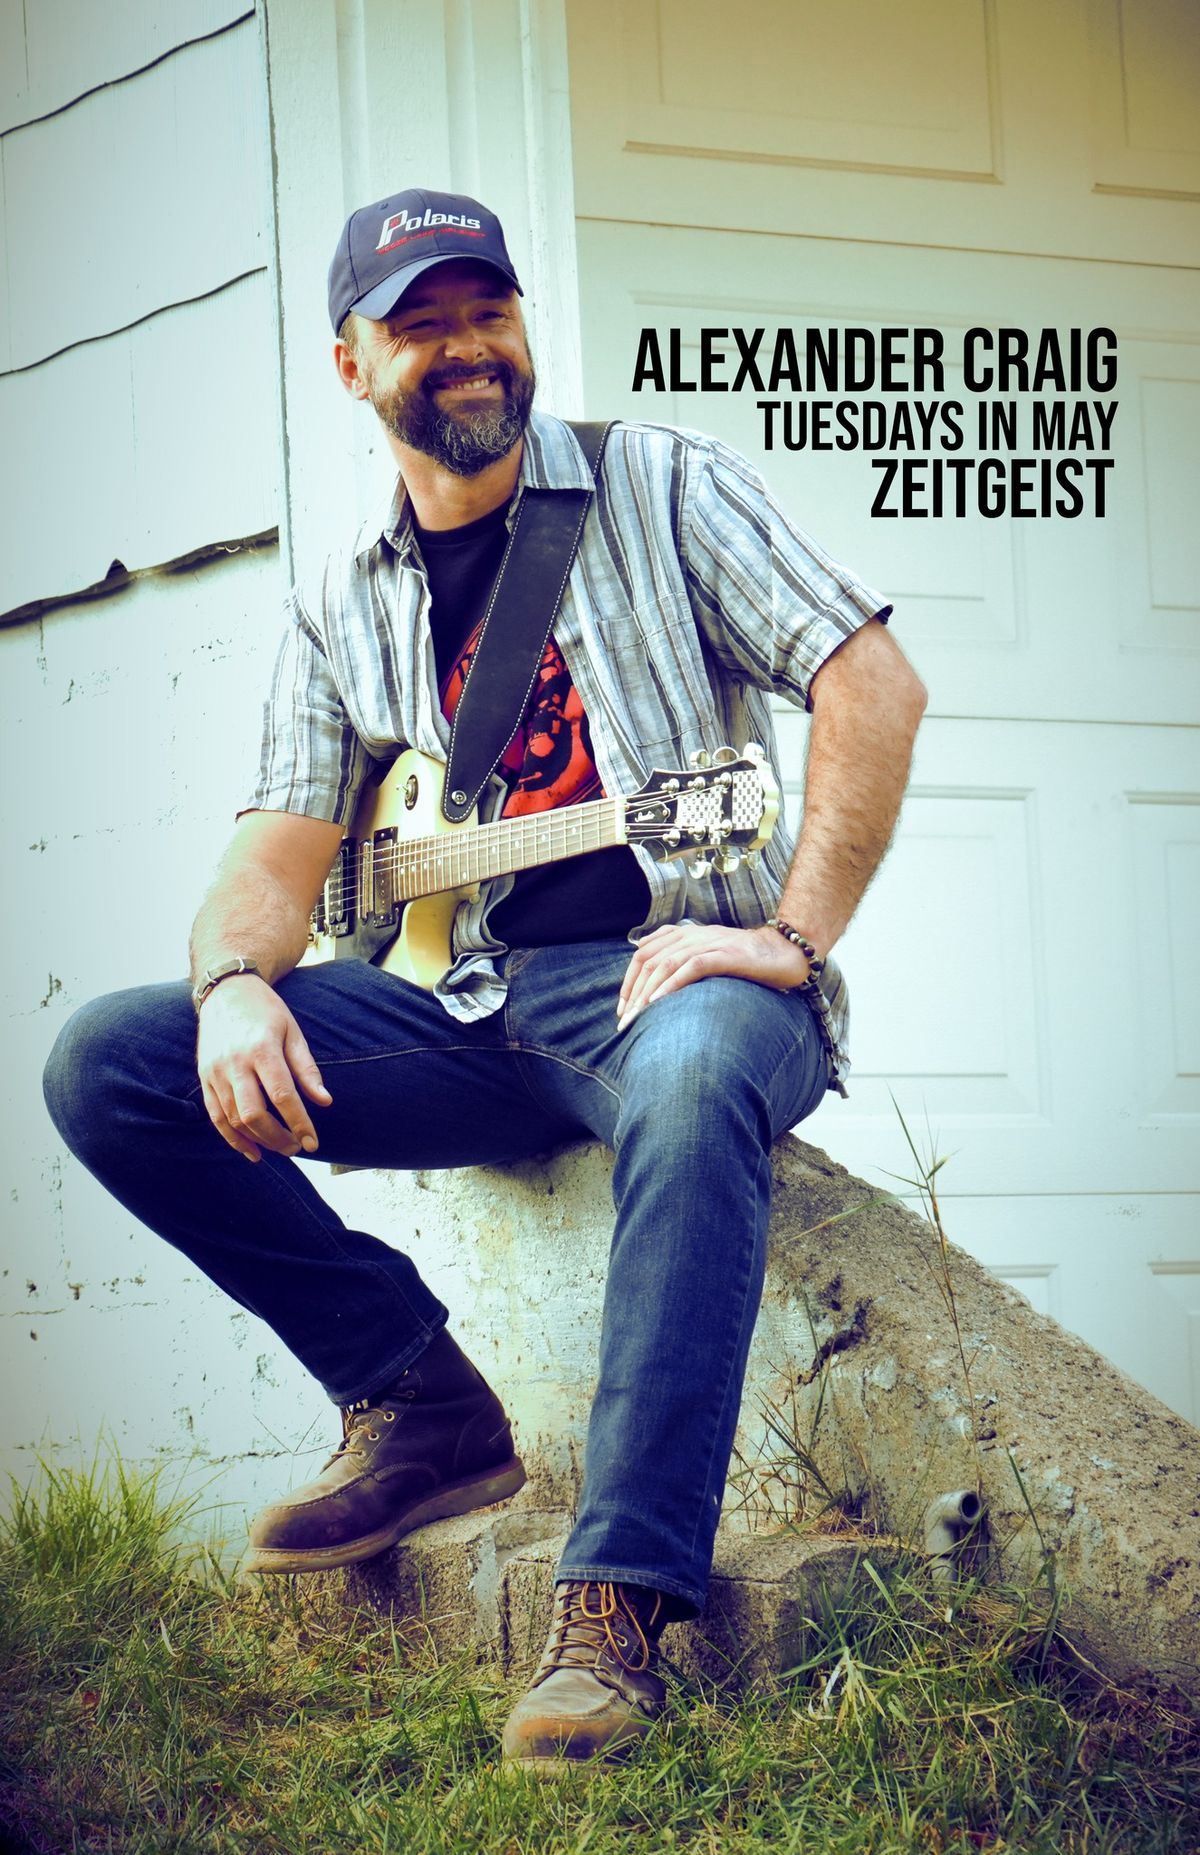 Alexander Craig Solo Acoustic Tuesdays in May